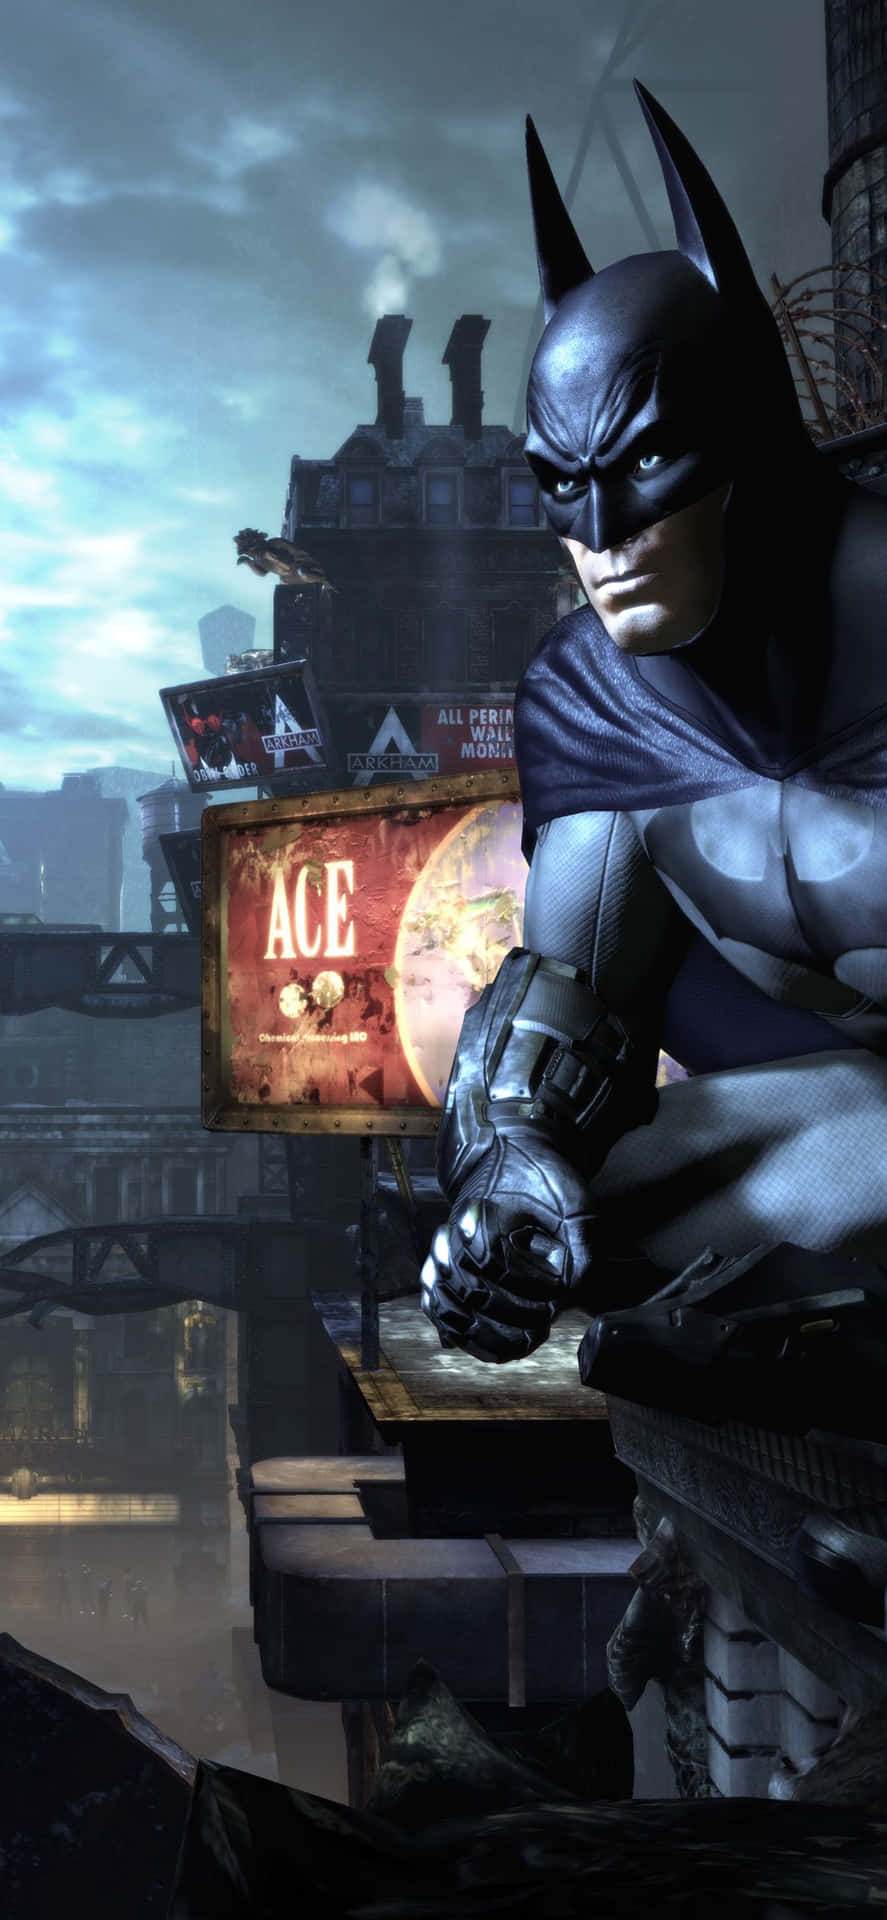 The Batman Arkham City logo brightly displayed on an iPhone Xs Max